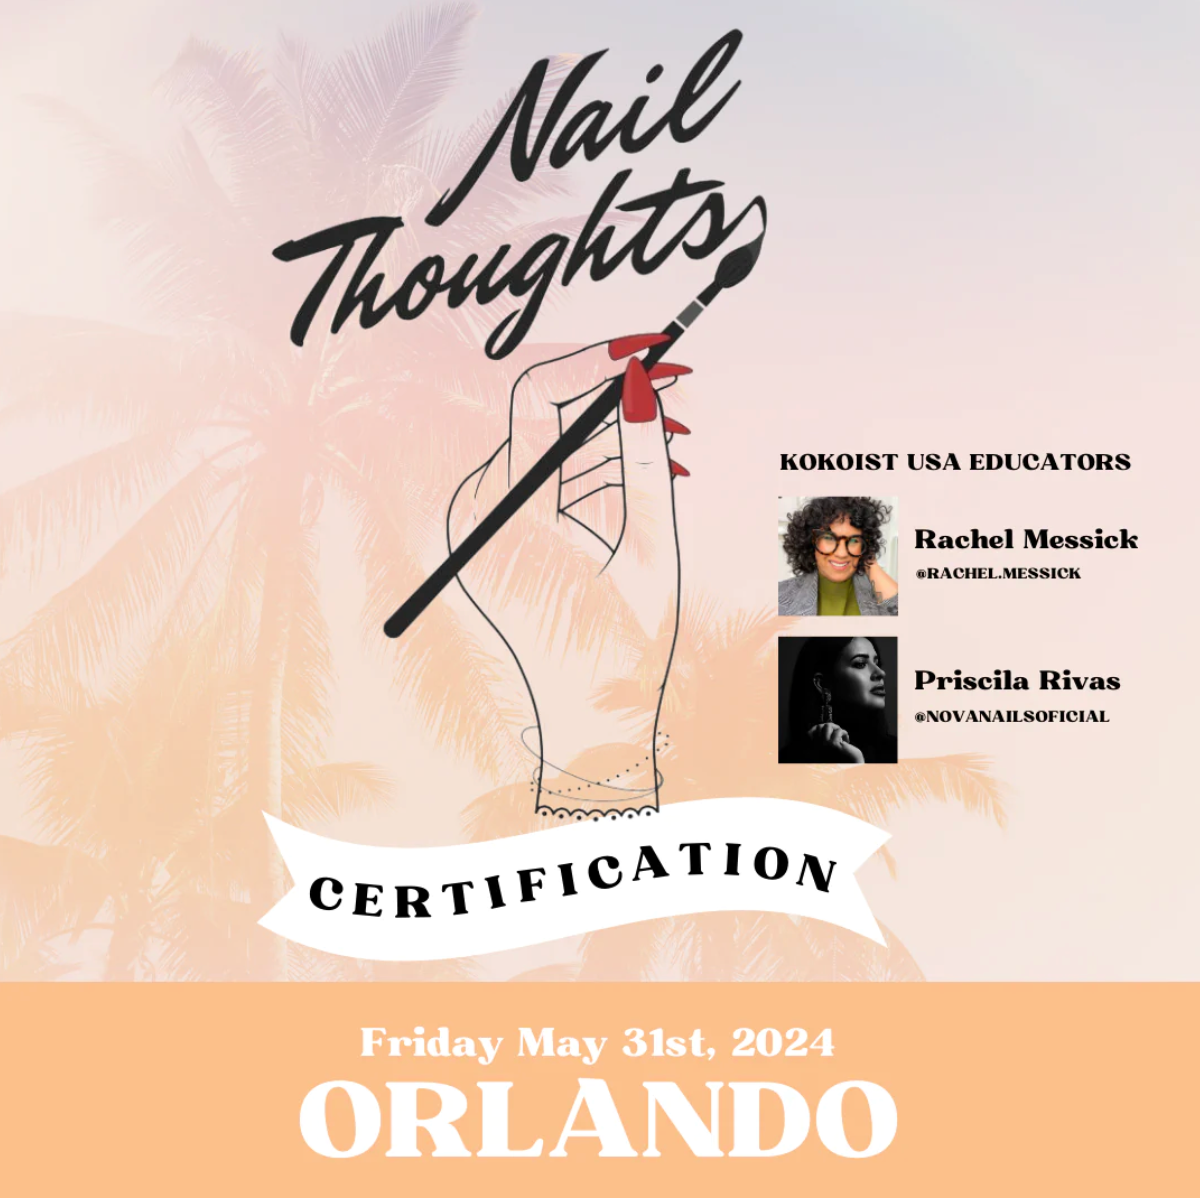 In Person Nail Thoughts Certification Class 5/31 (Orlando, FL)